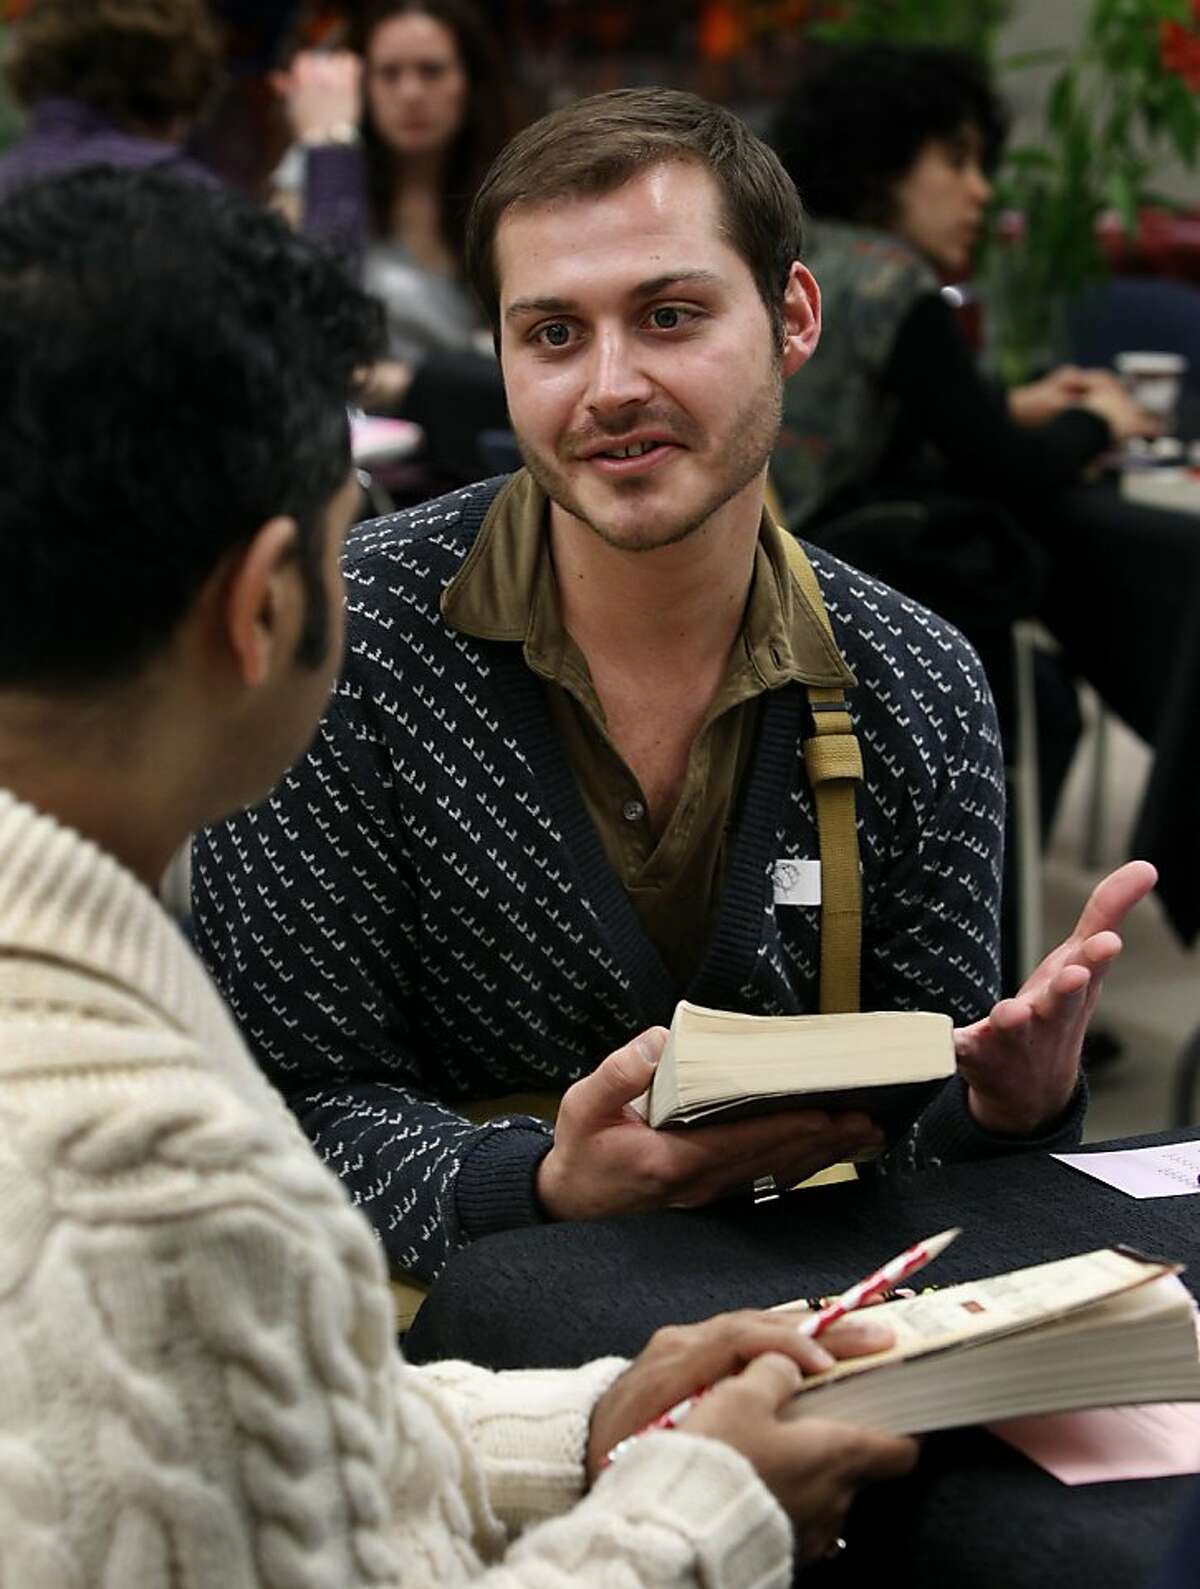 Blake Love meets Ameet Kamath (left) at an LGBT speed dating event at the Main Library in San Francisco, Calif., on Wednesday, Feb. 2, 2011. Participants were encouraged to bring their favorite book as a conversation starter.